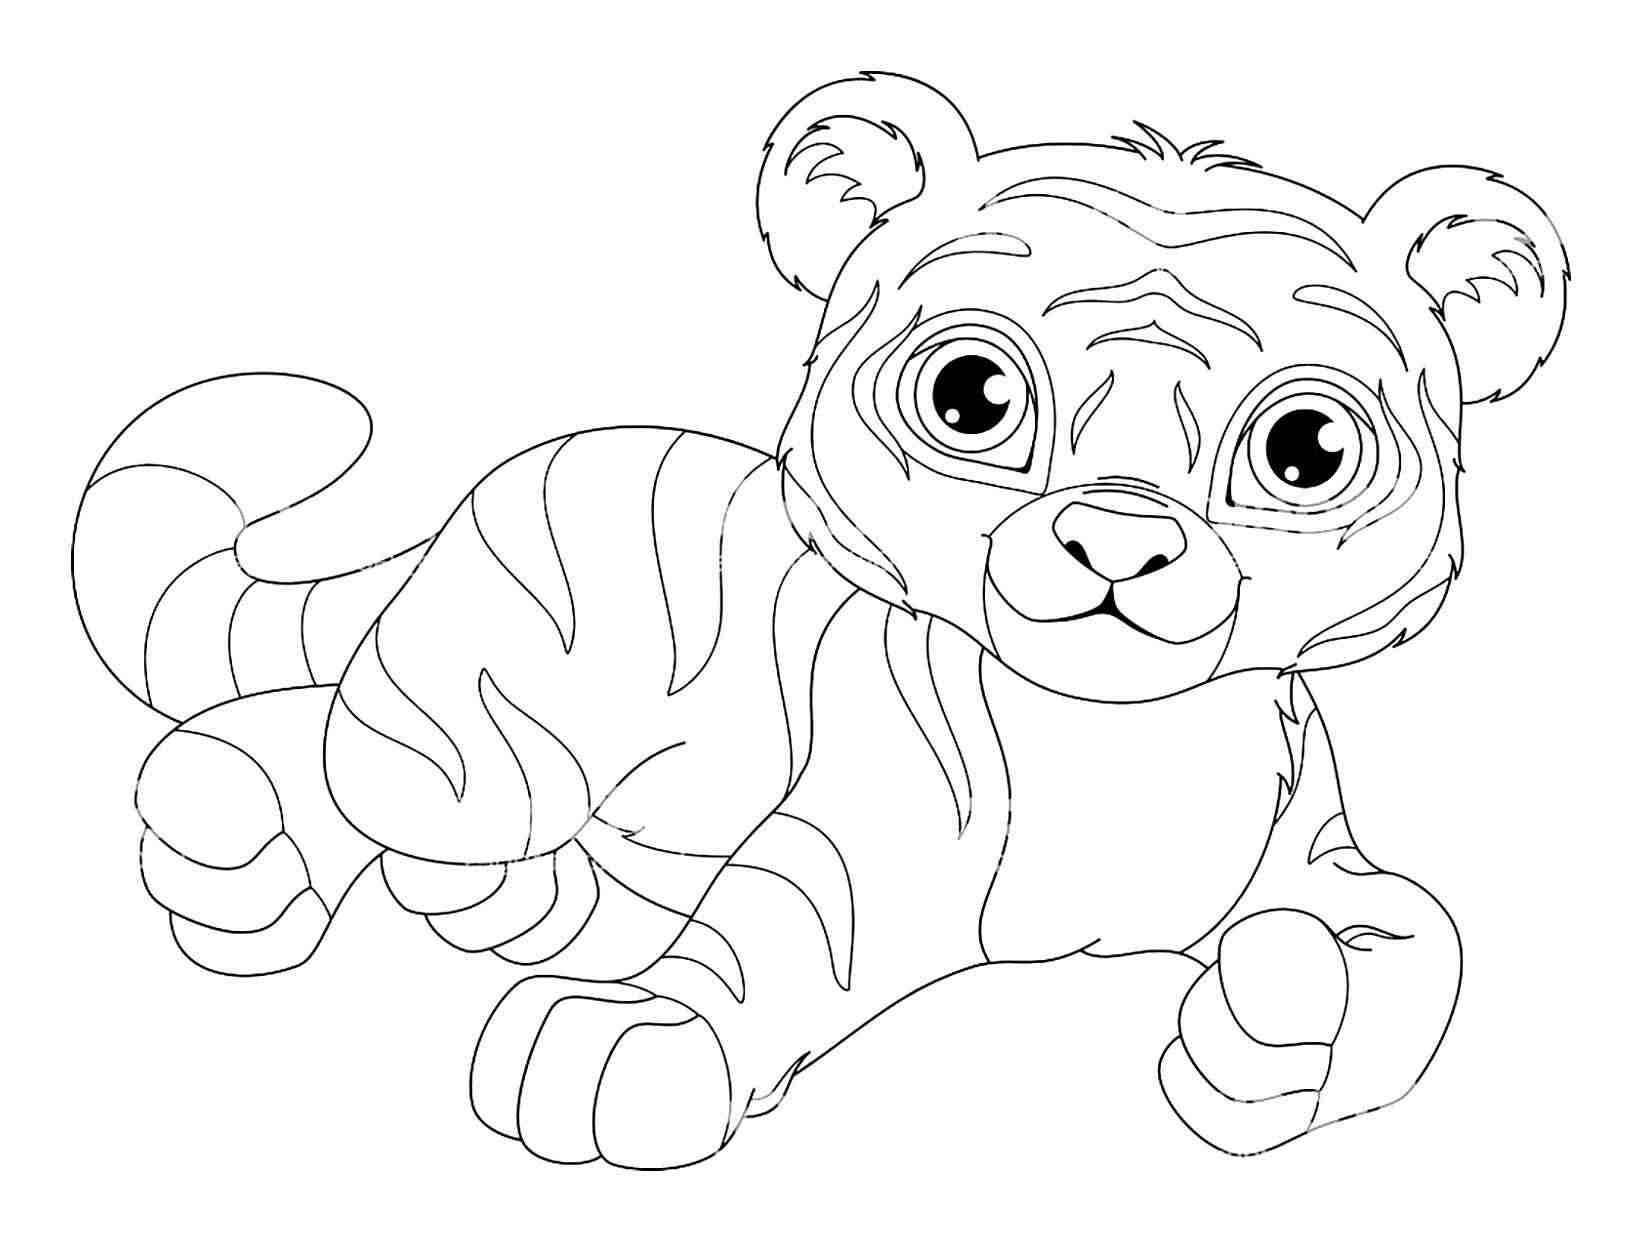 coloring-pages-tiger-home-design-ideas